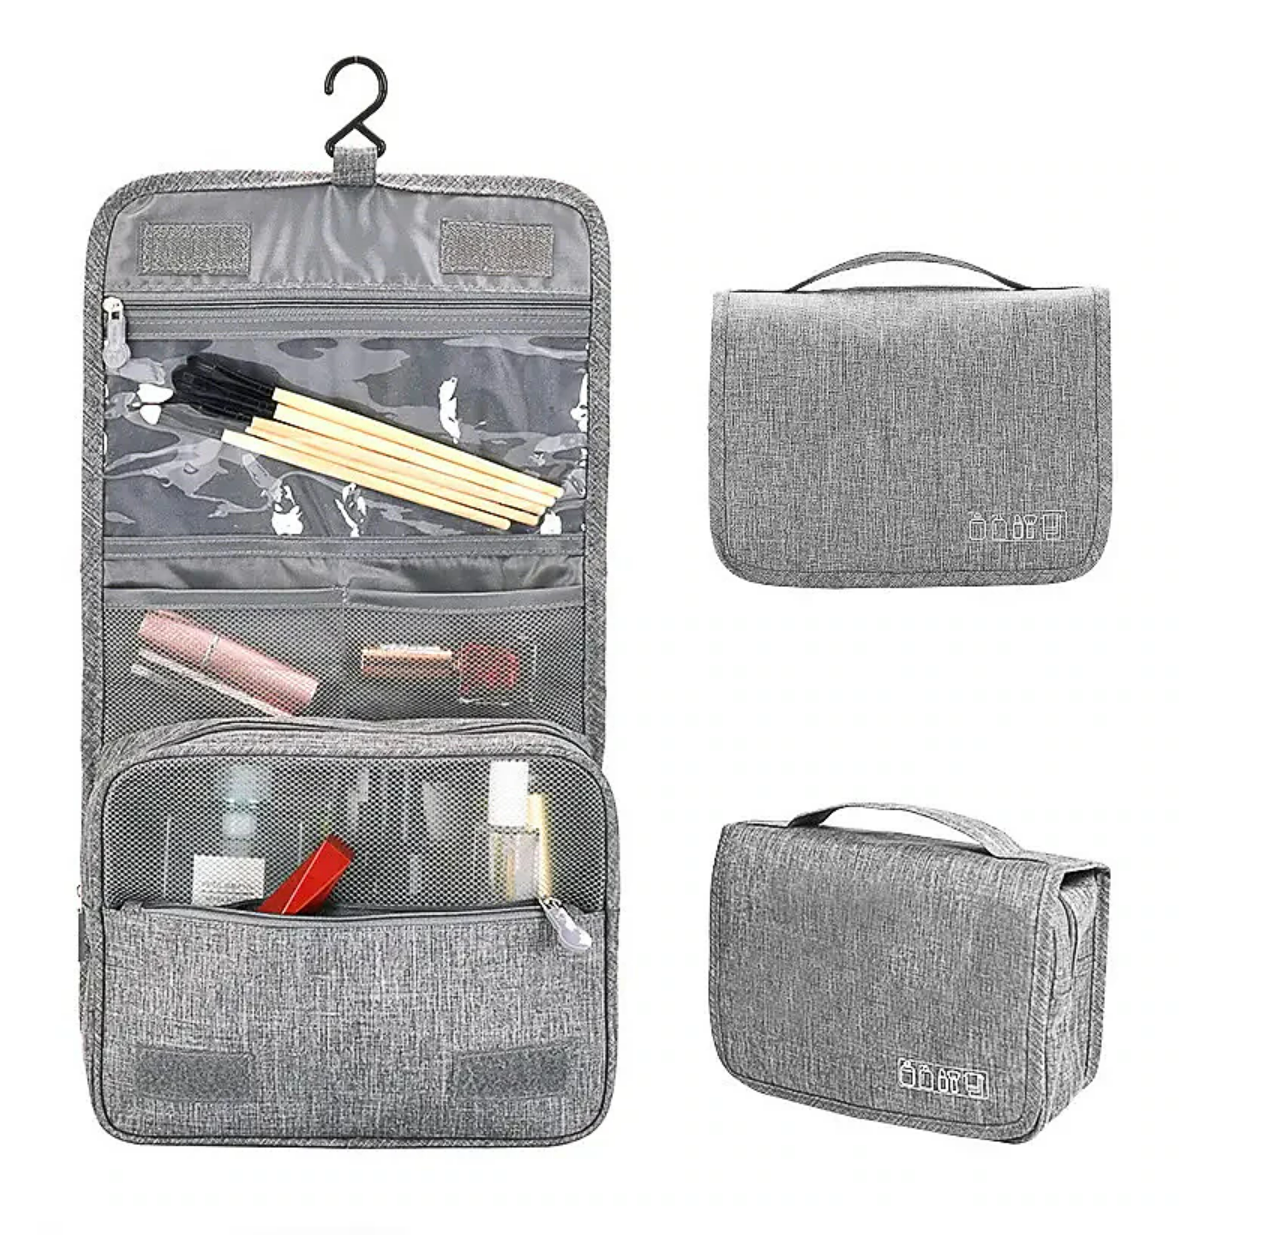 1pc Hanging Travel Toiletry BagCosmetic And Bath Organizer Bag